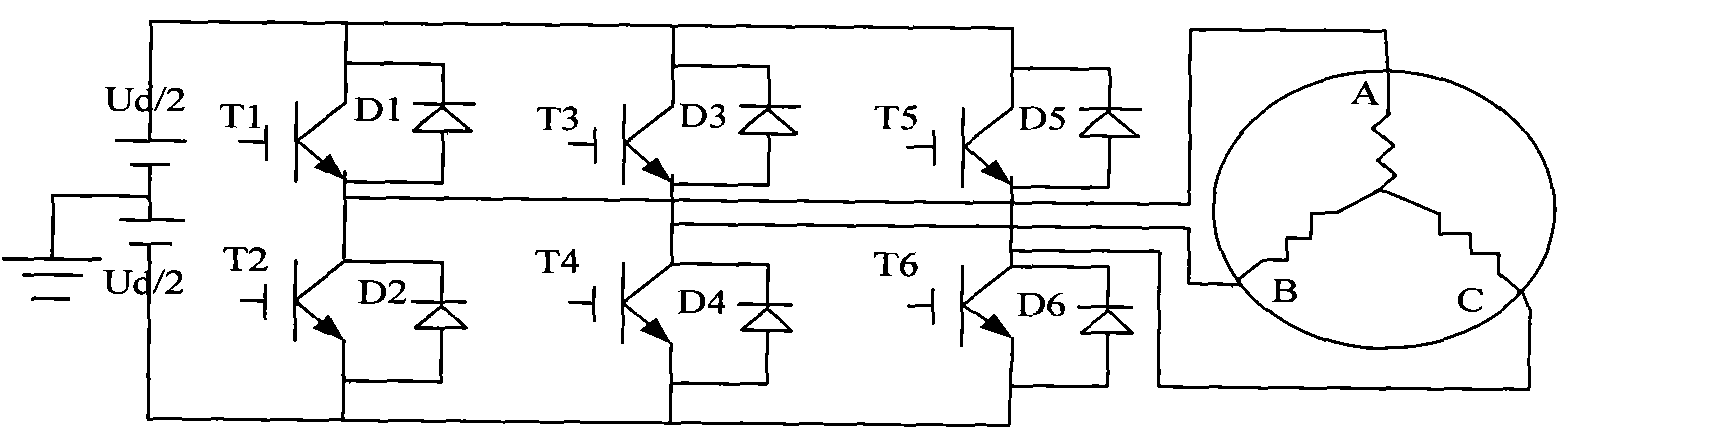 Alternating-current asynchronous motor frequency converter without speed sensor